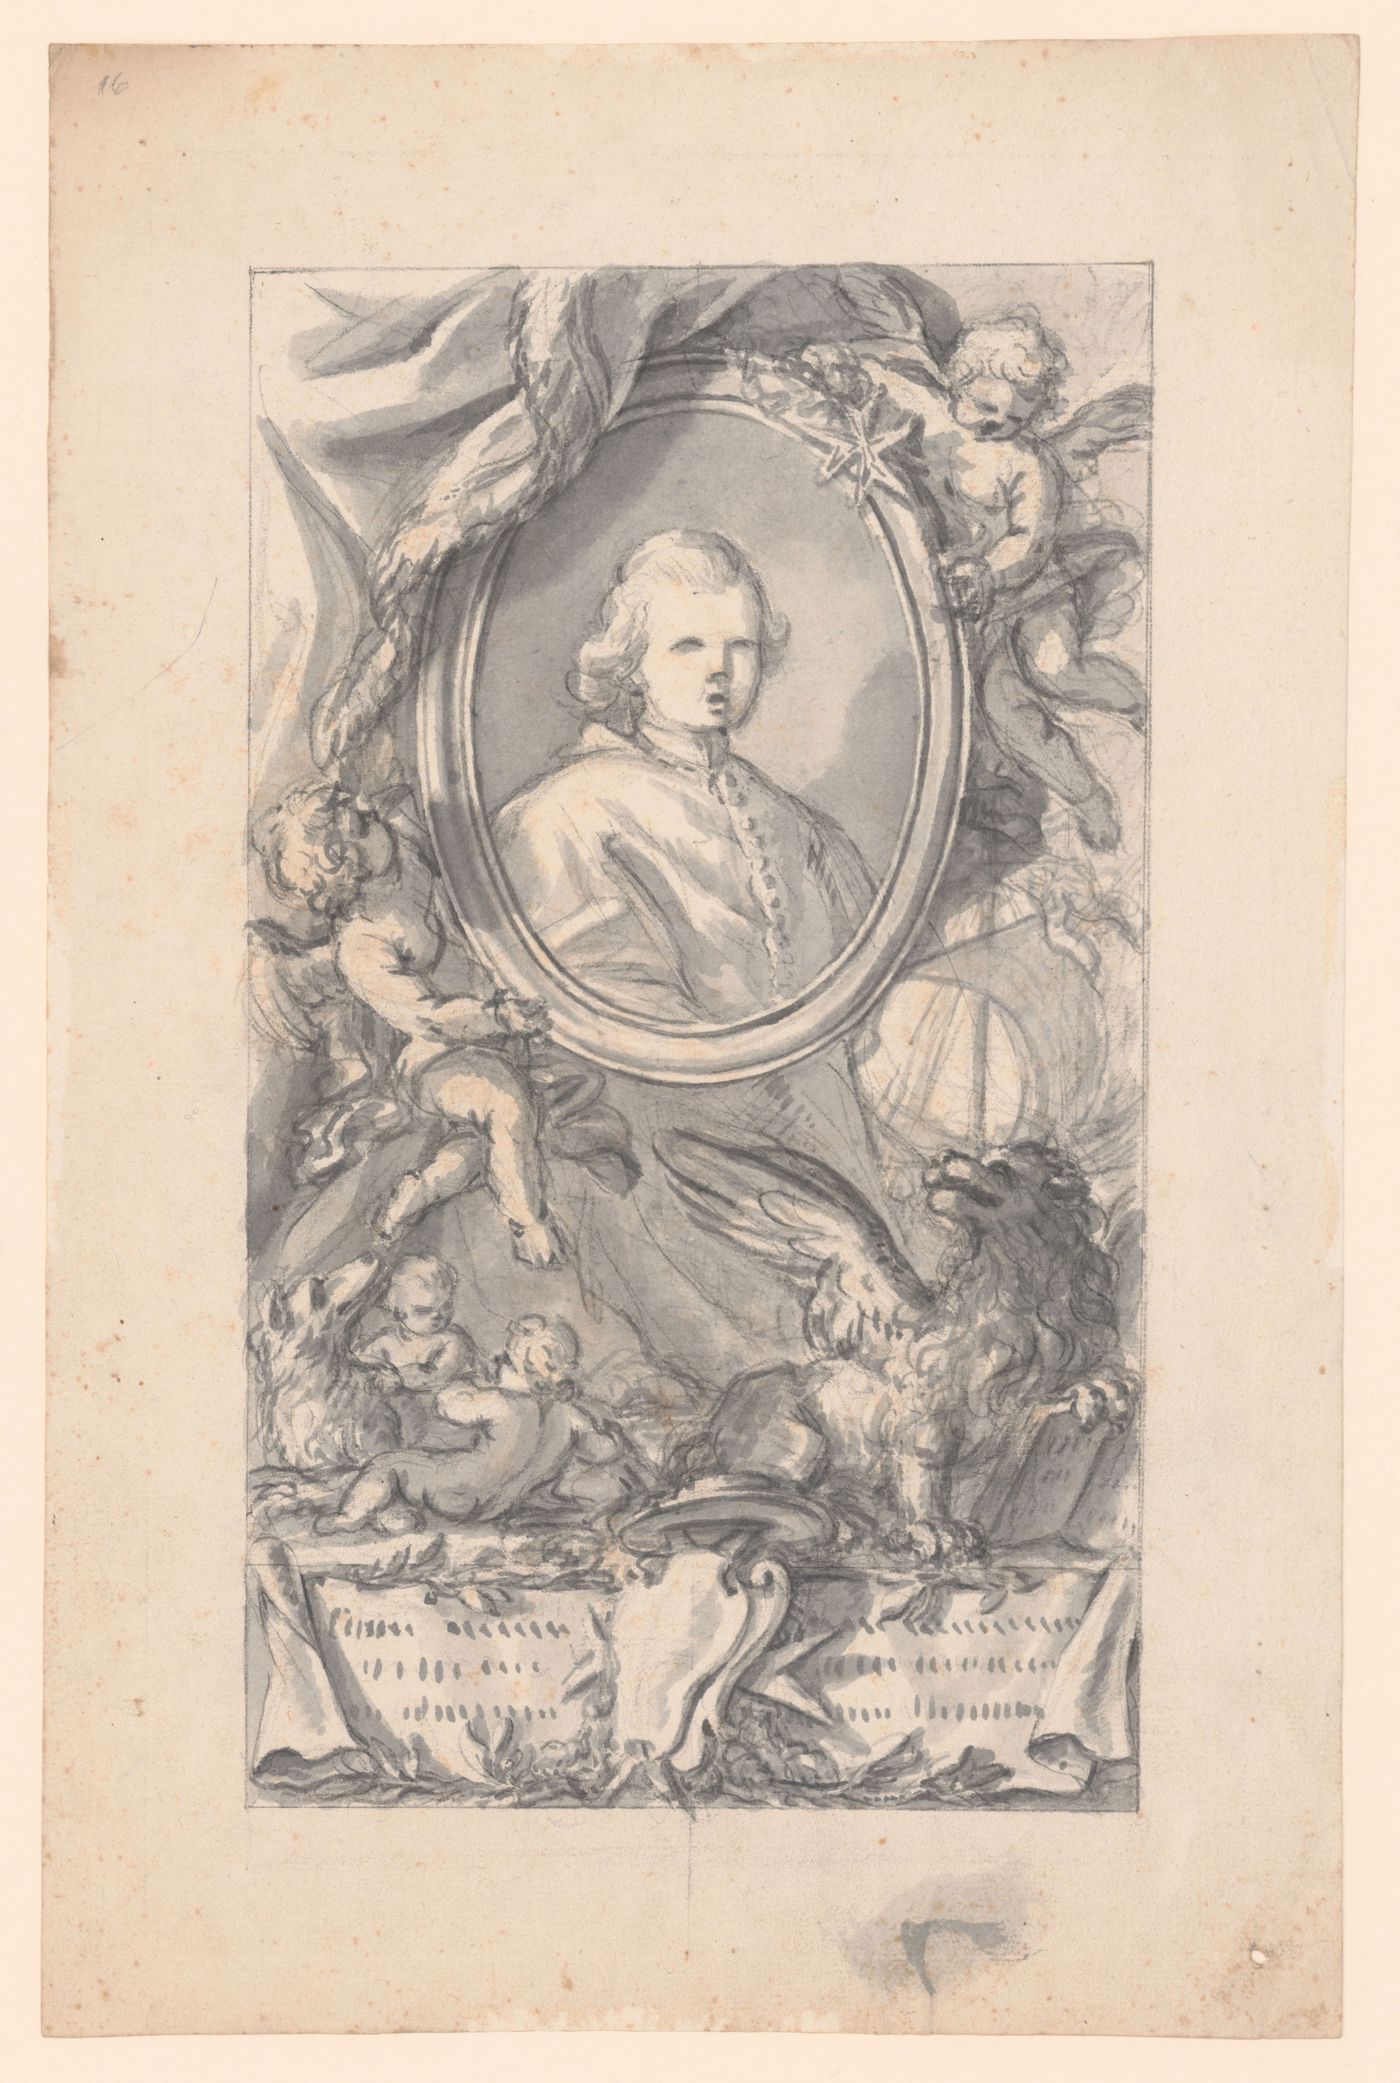 Study for a memorial or dedicatory frontispiece